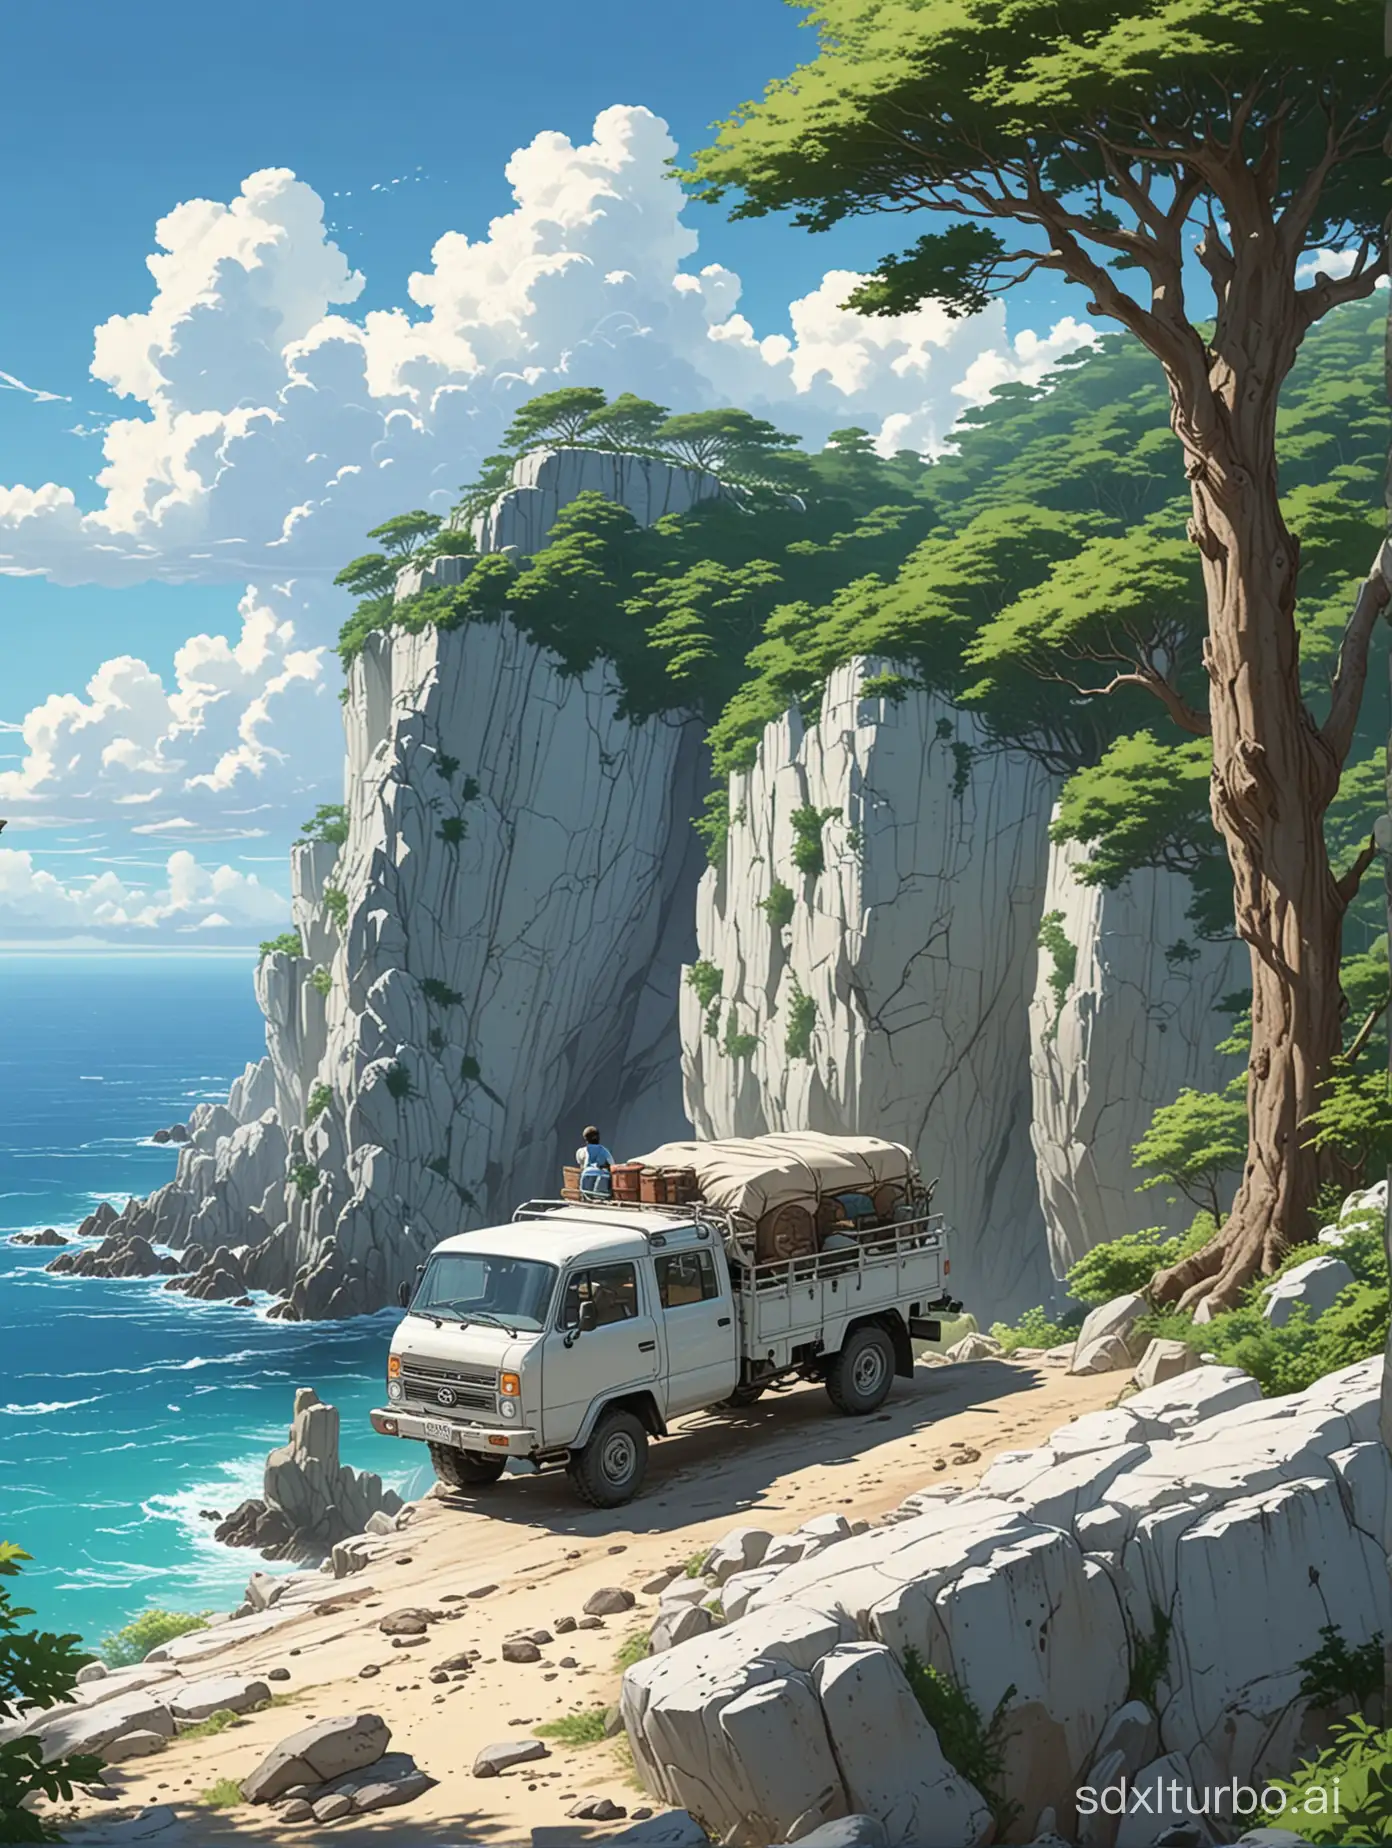 Studio-Ghibli-Style-Boy-on-Cliff-Edge-Overlooking-Ocean-View-with-Truck-and-Trees